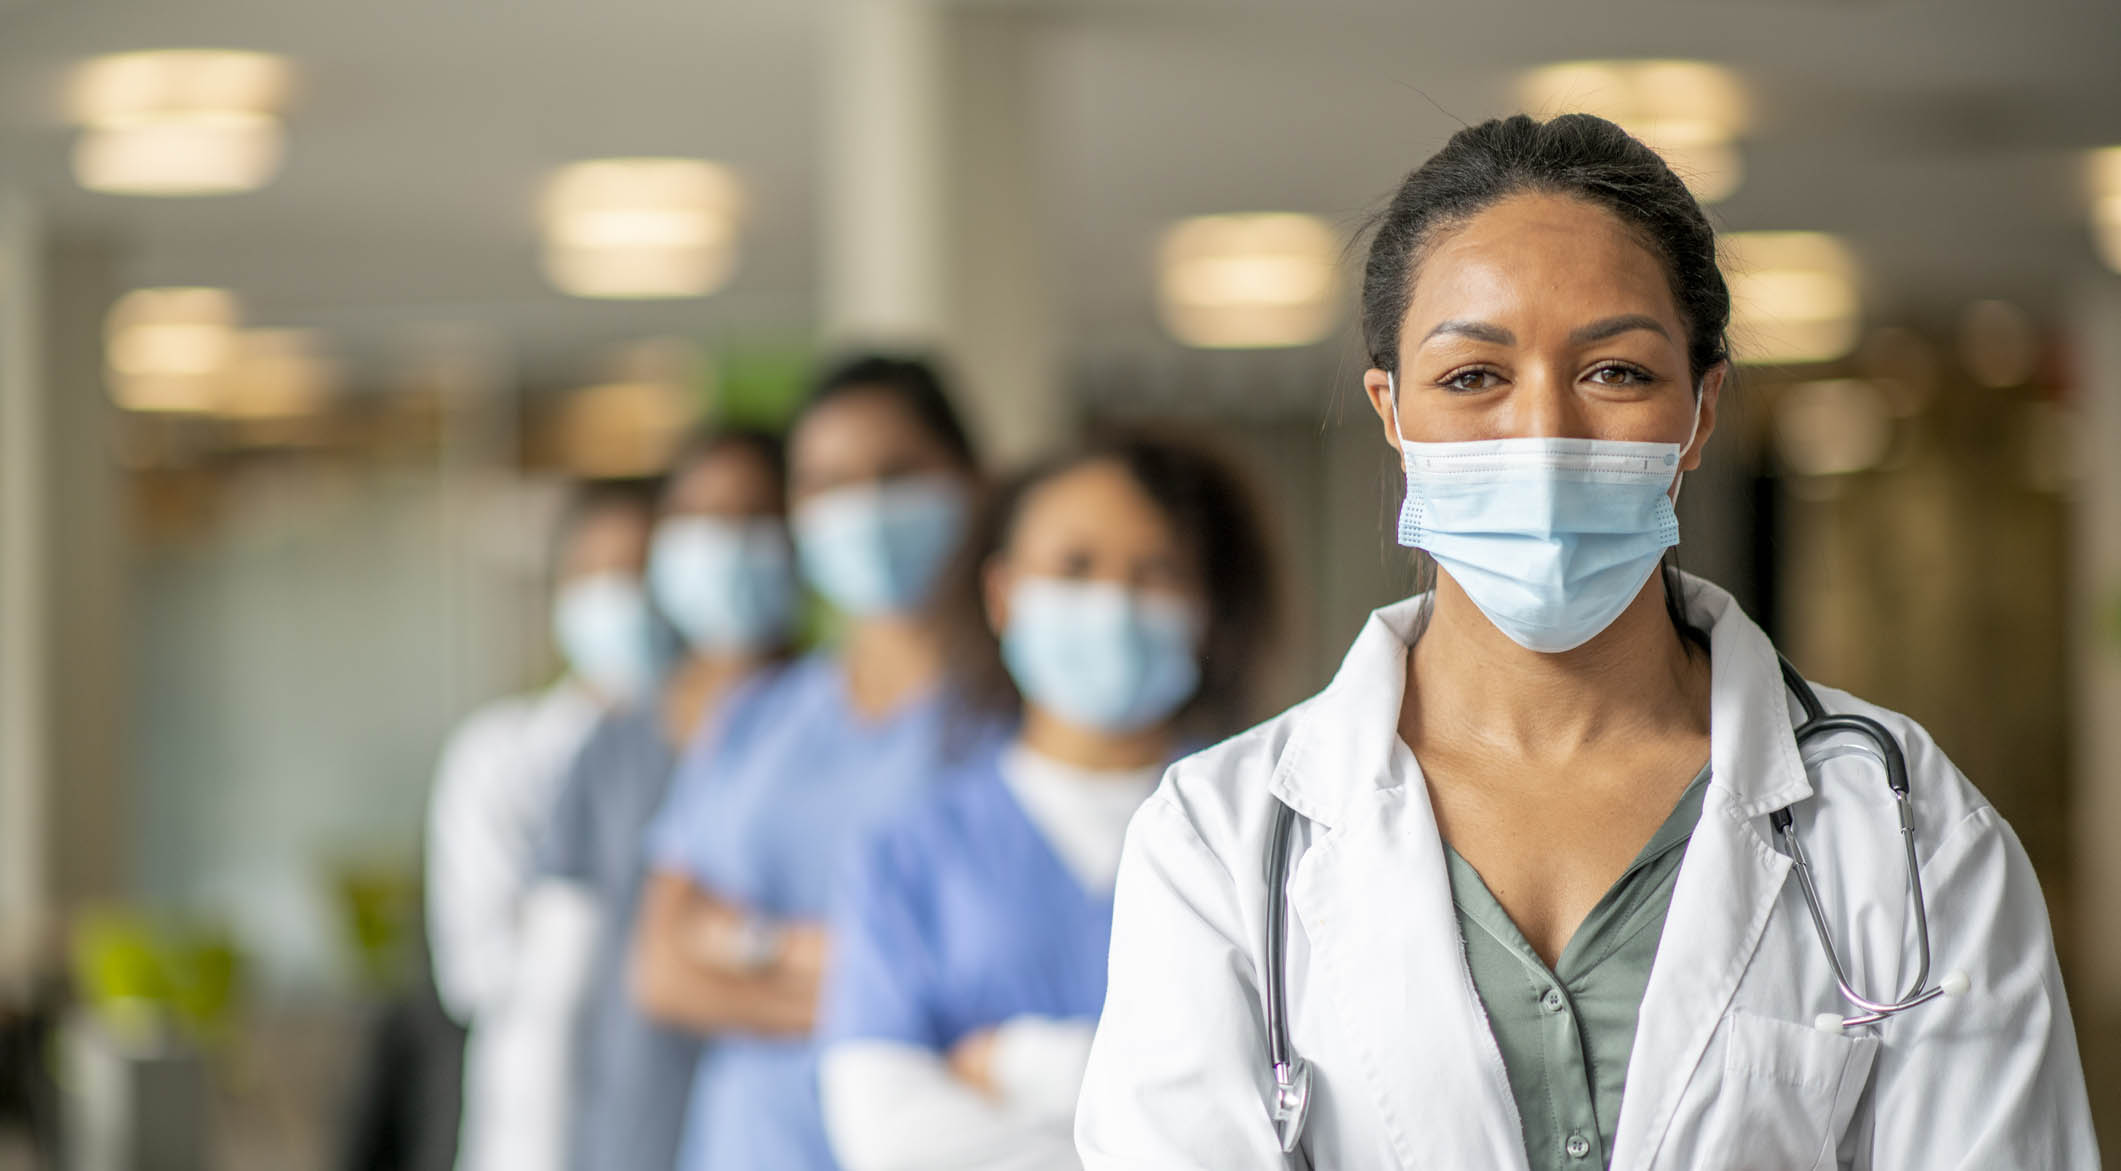 Woman in surgical mask and doctor's coat standing in front of others in surgical masks